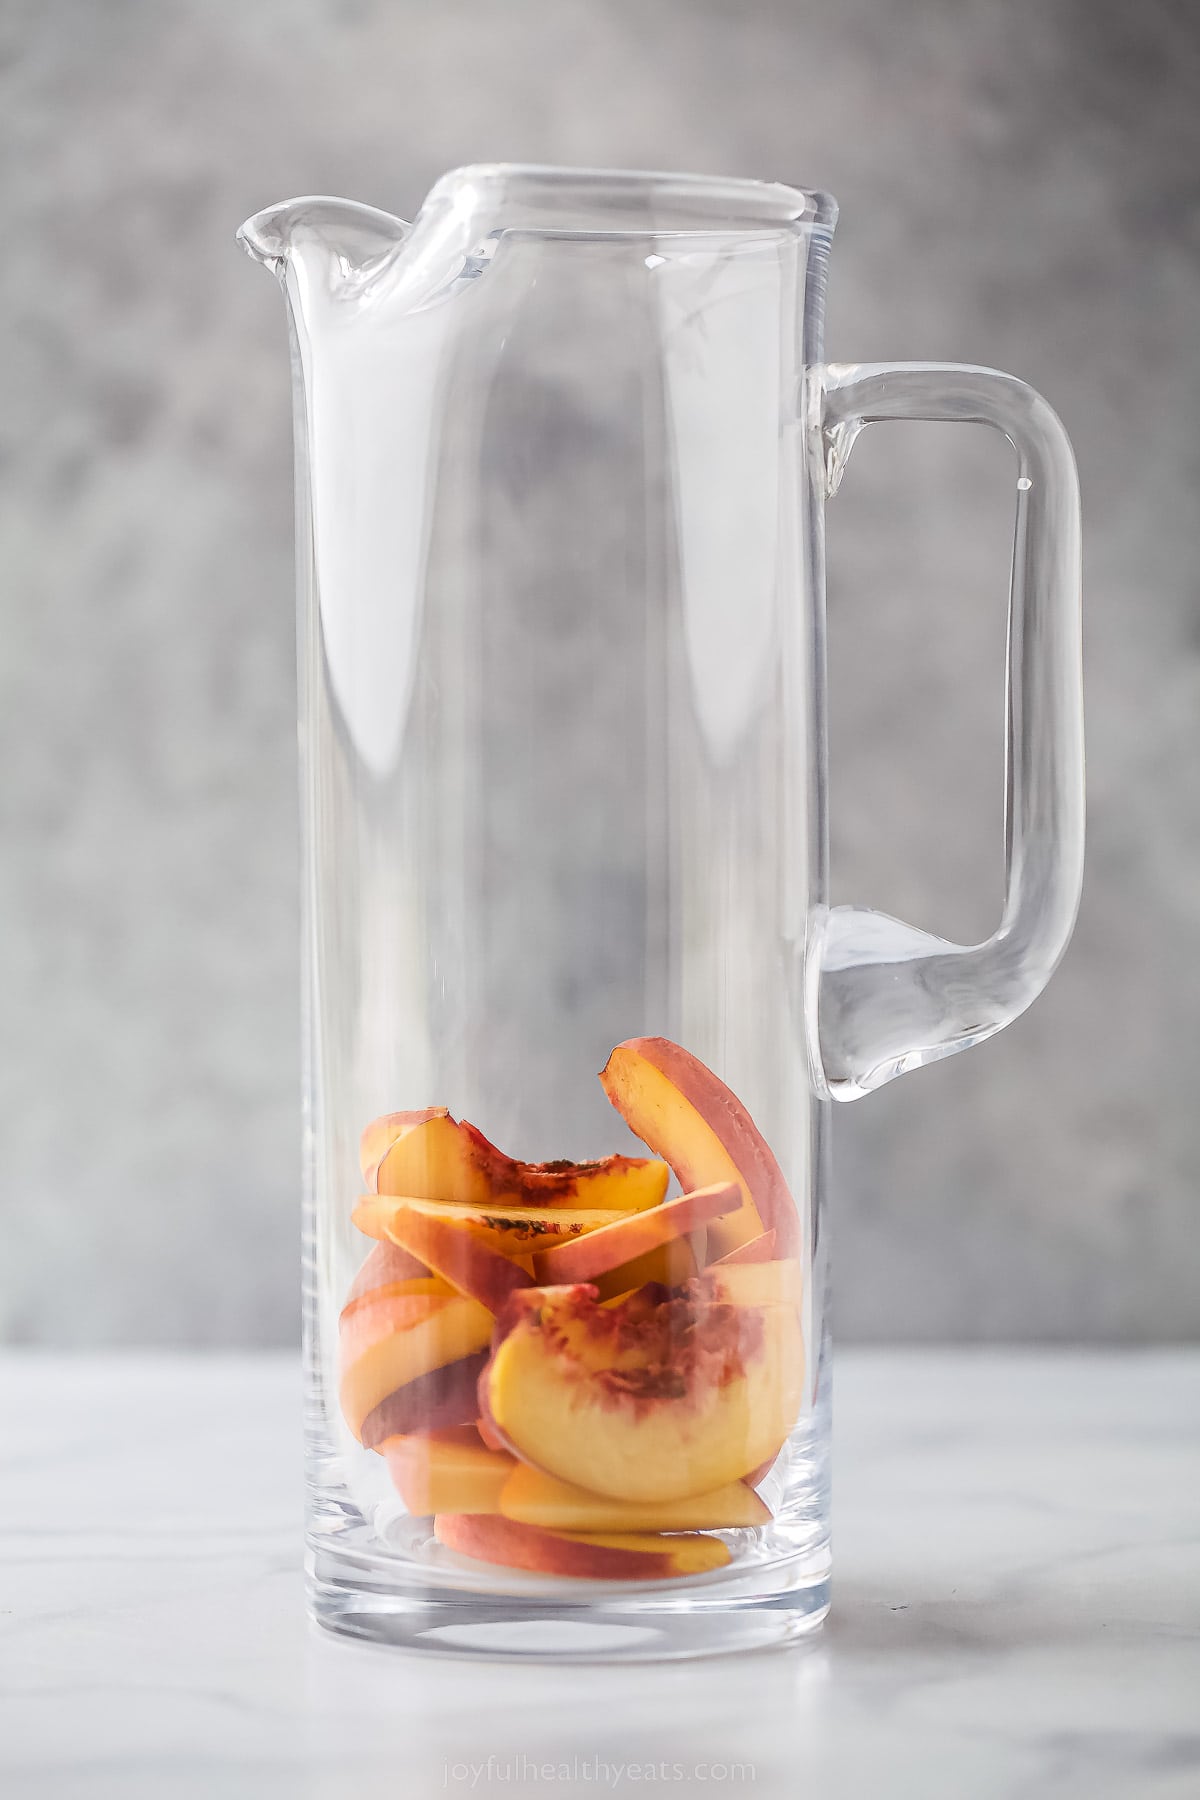 Adding the peaches to the pitcher.